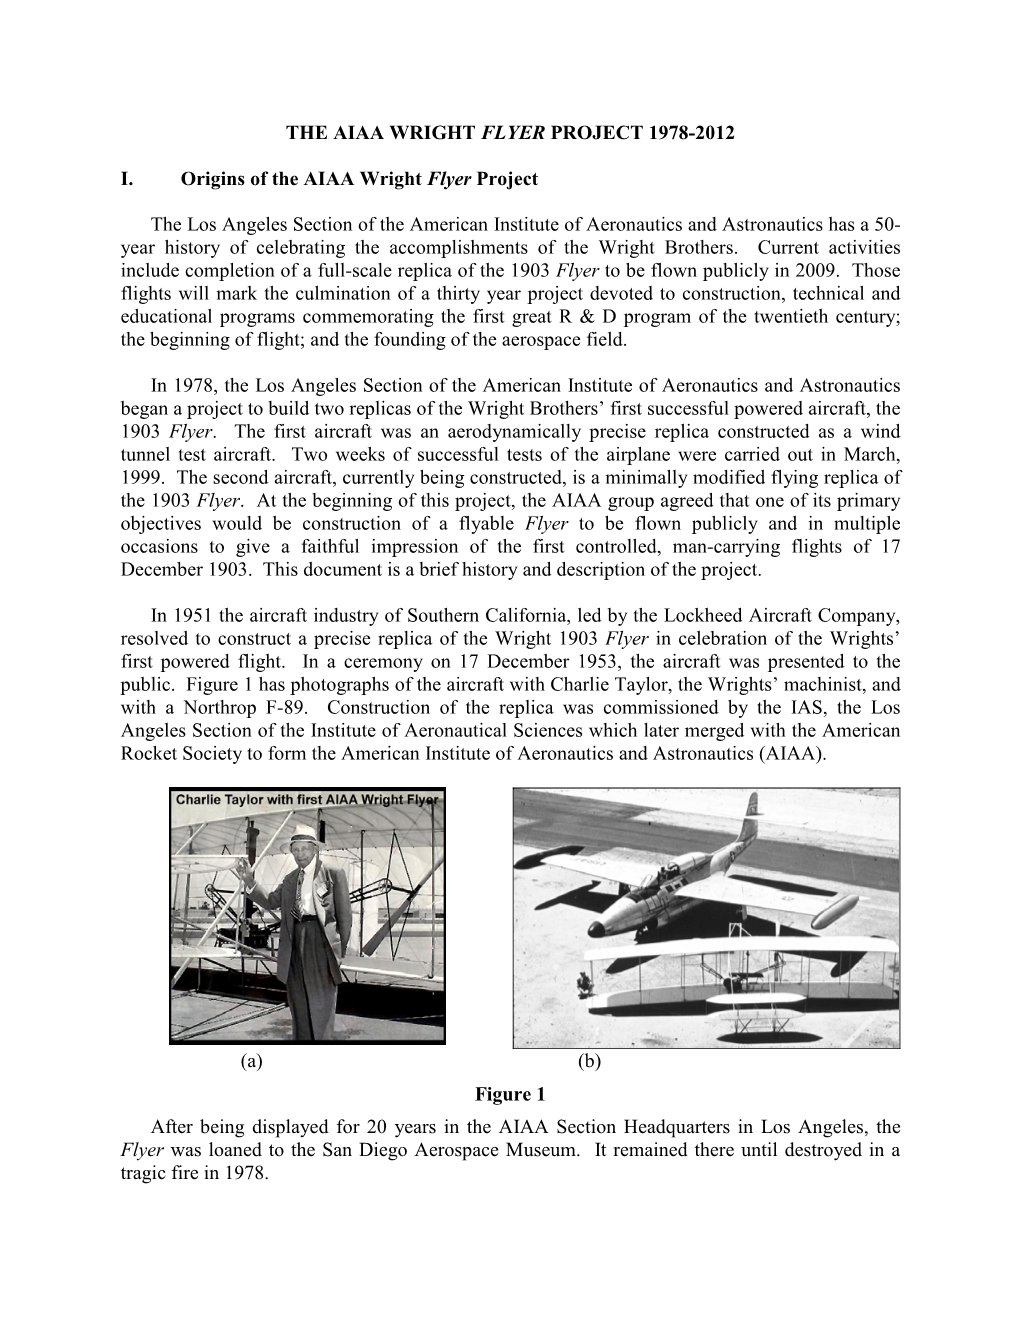 The Aiaa Wright Flyer Project 1978-2012